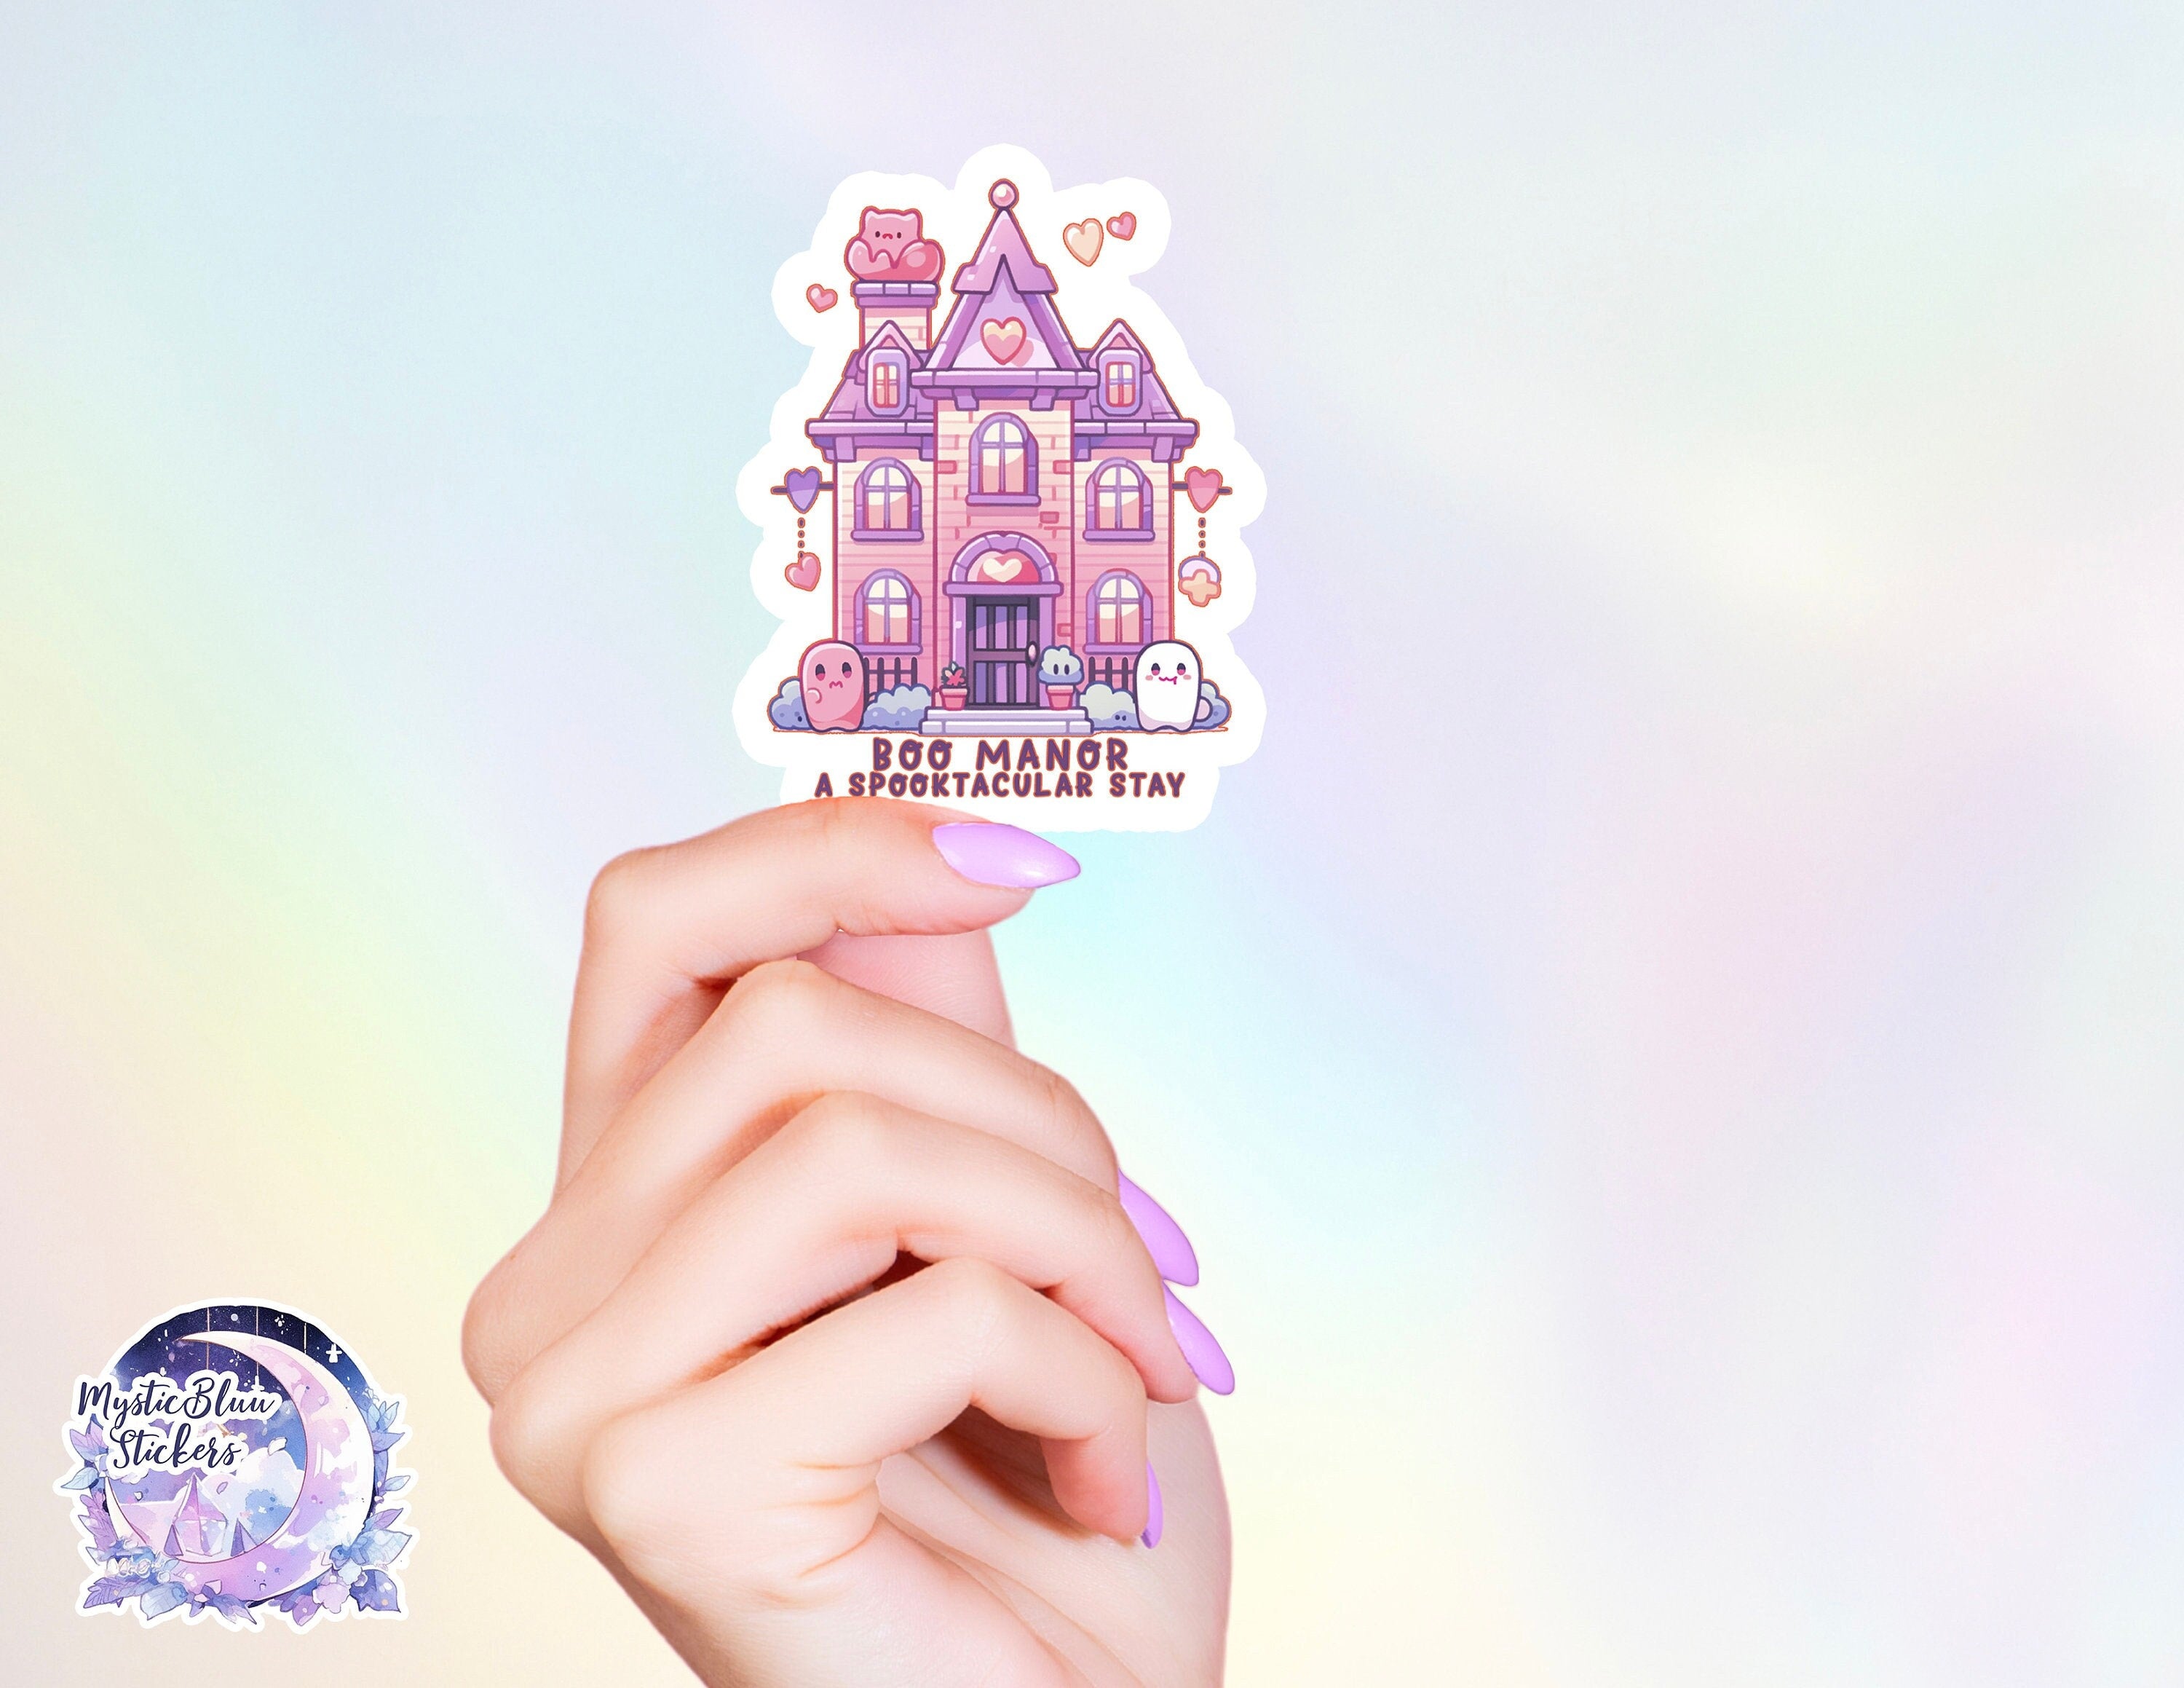 Cute Haunted House Sticker, Boo Manor Halloween stickers, spooky stickers, kindle stickers, holographic rainbow, funny quotes, laptop